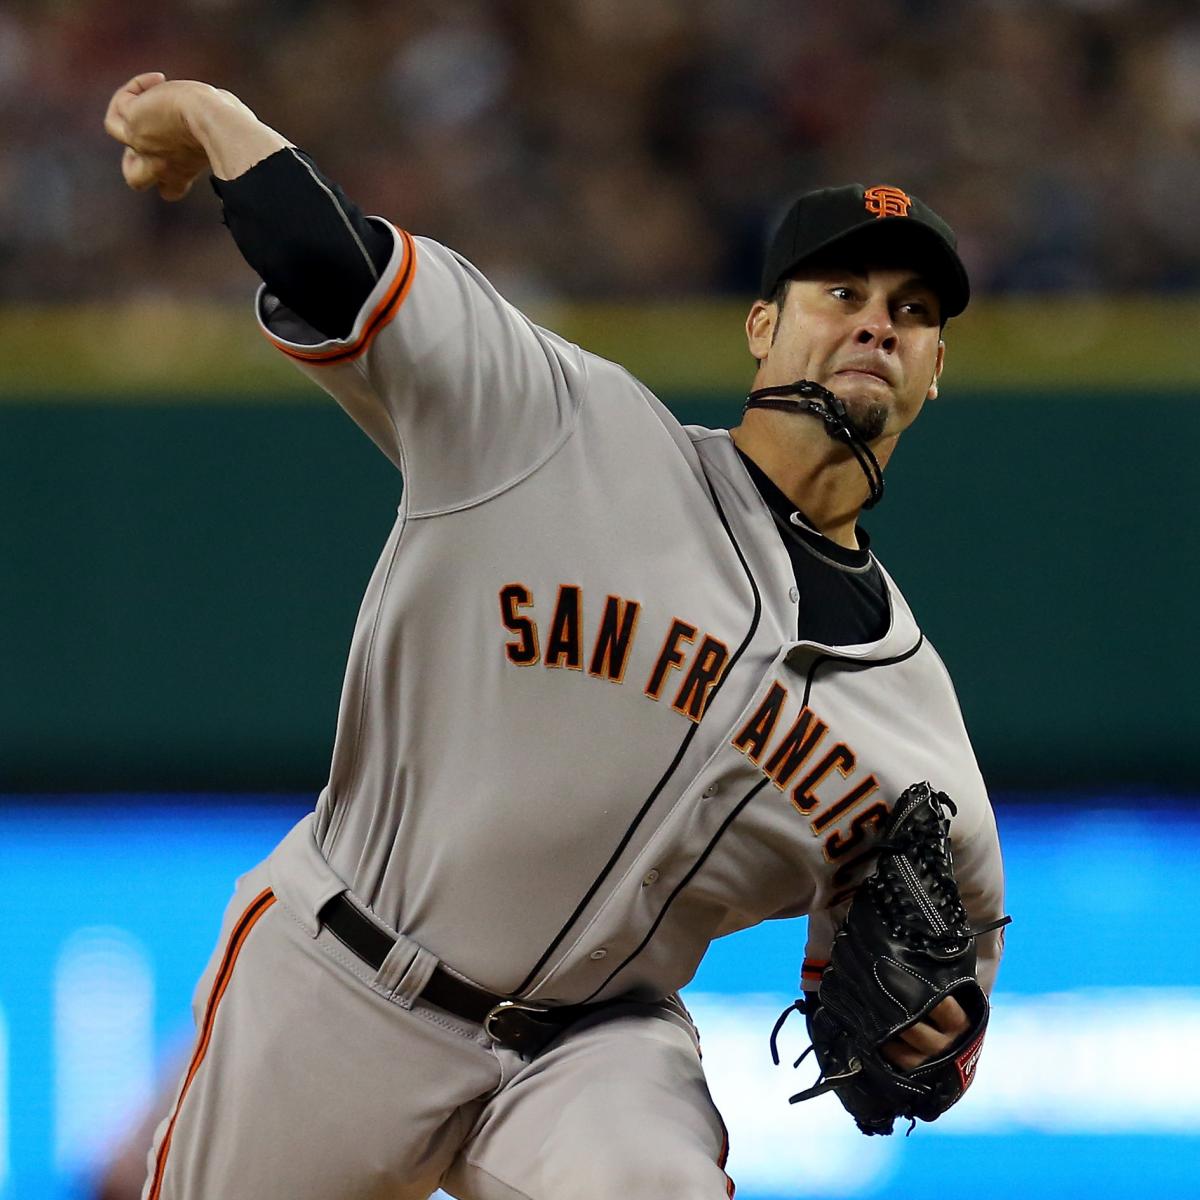 SF Giants: Playing with Team USA 'dream come true' for minor leaguers